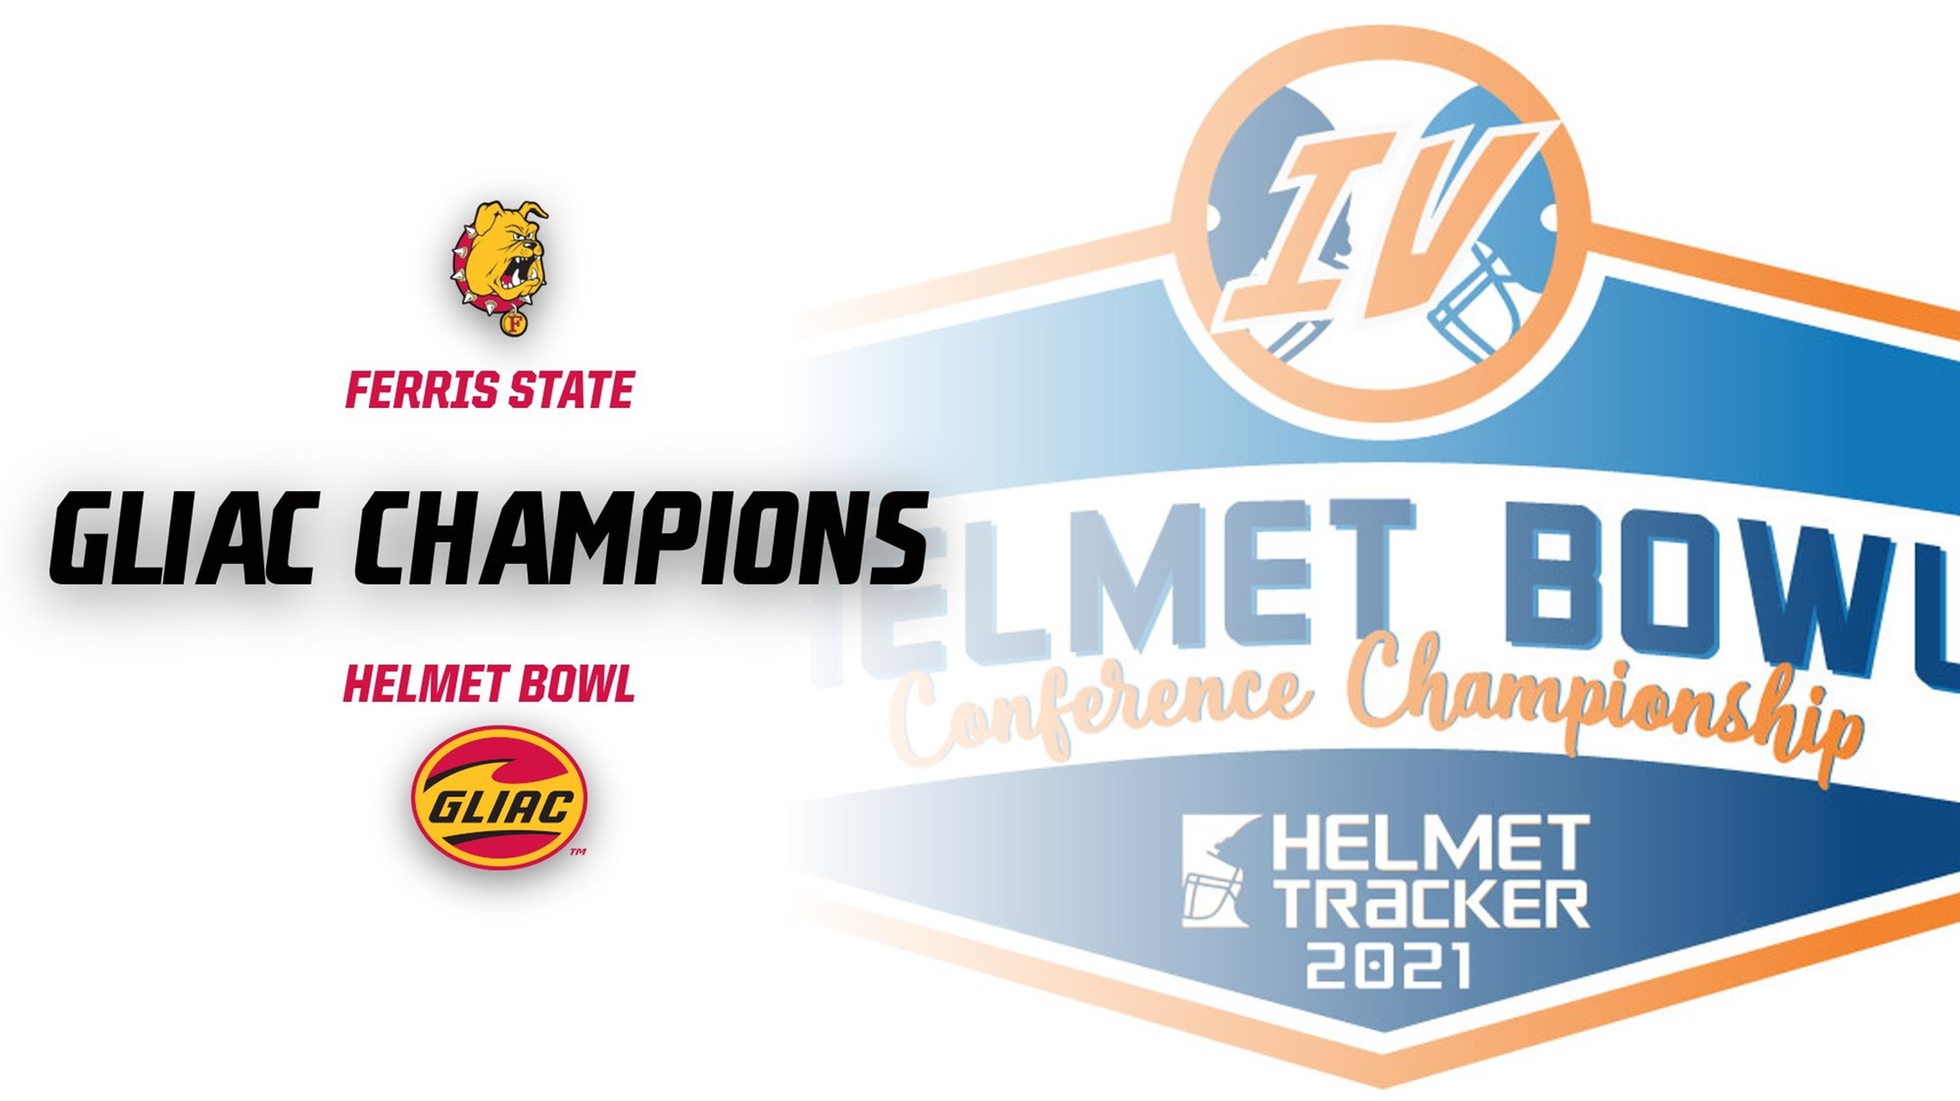 Ferris State Dominates Competition To Win GLIAC's Helmet Bowl Championship En Route To National Bracket